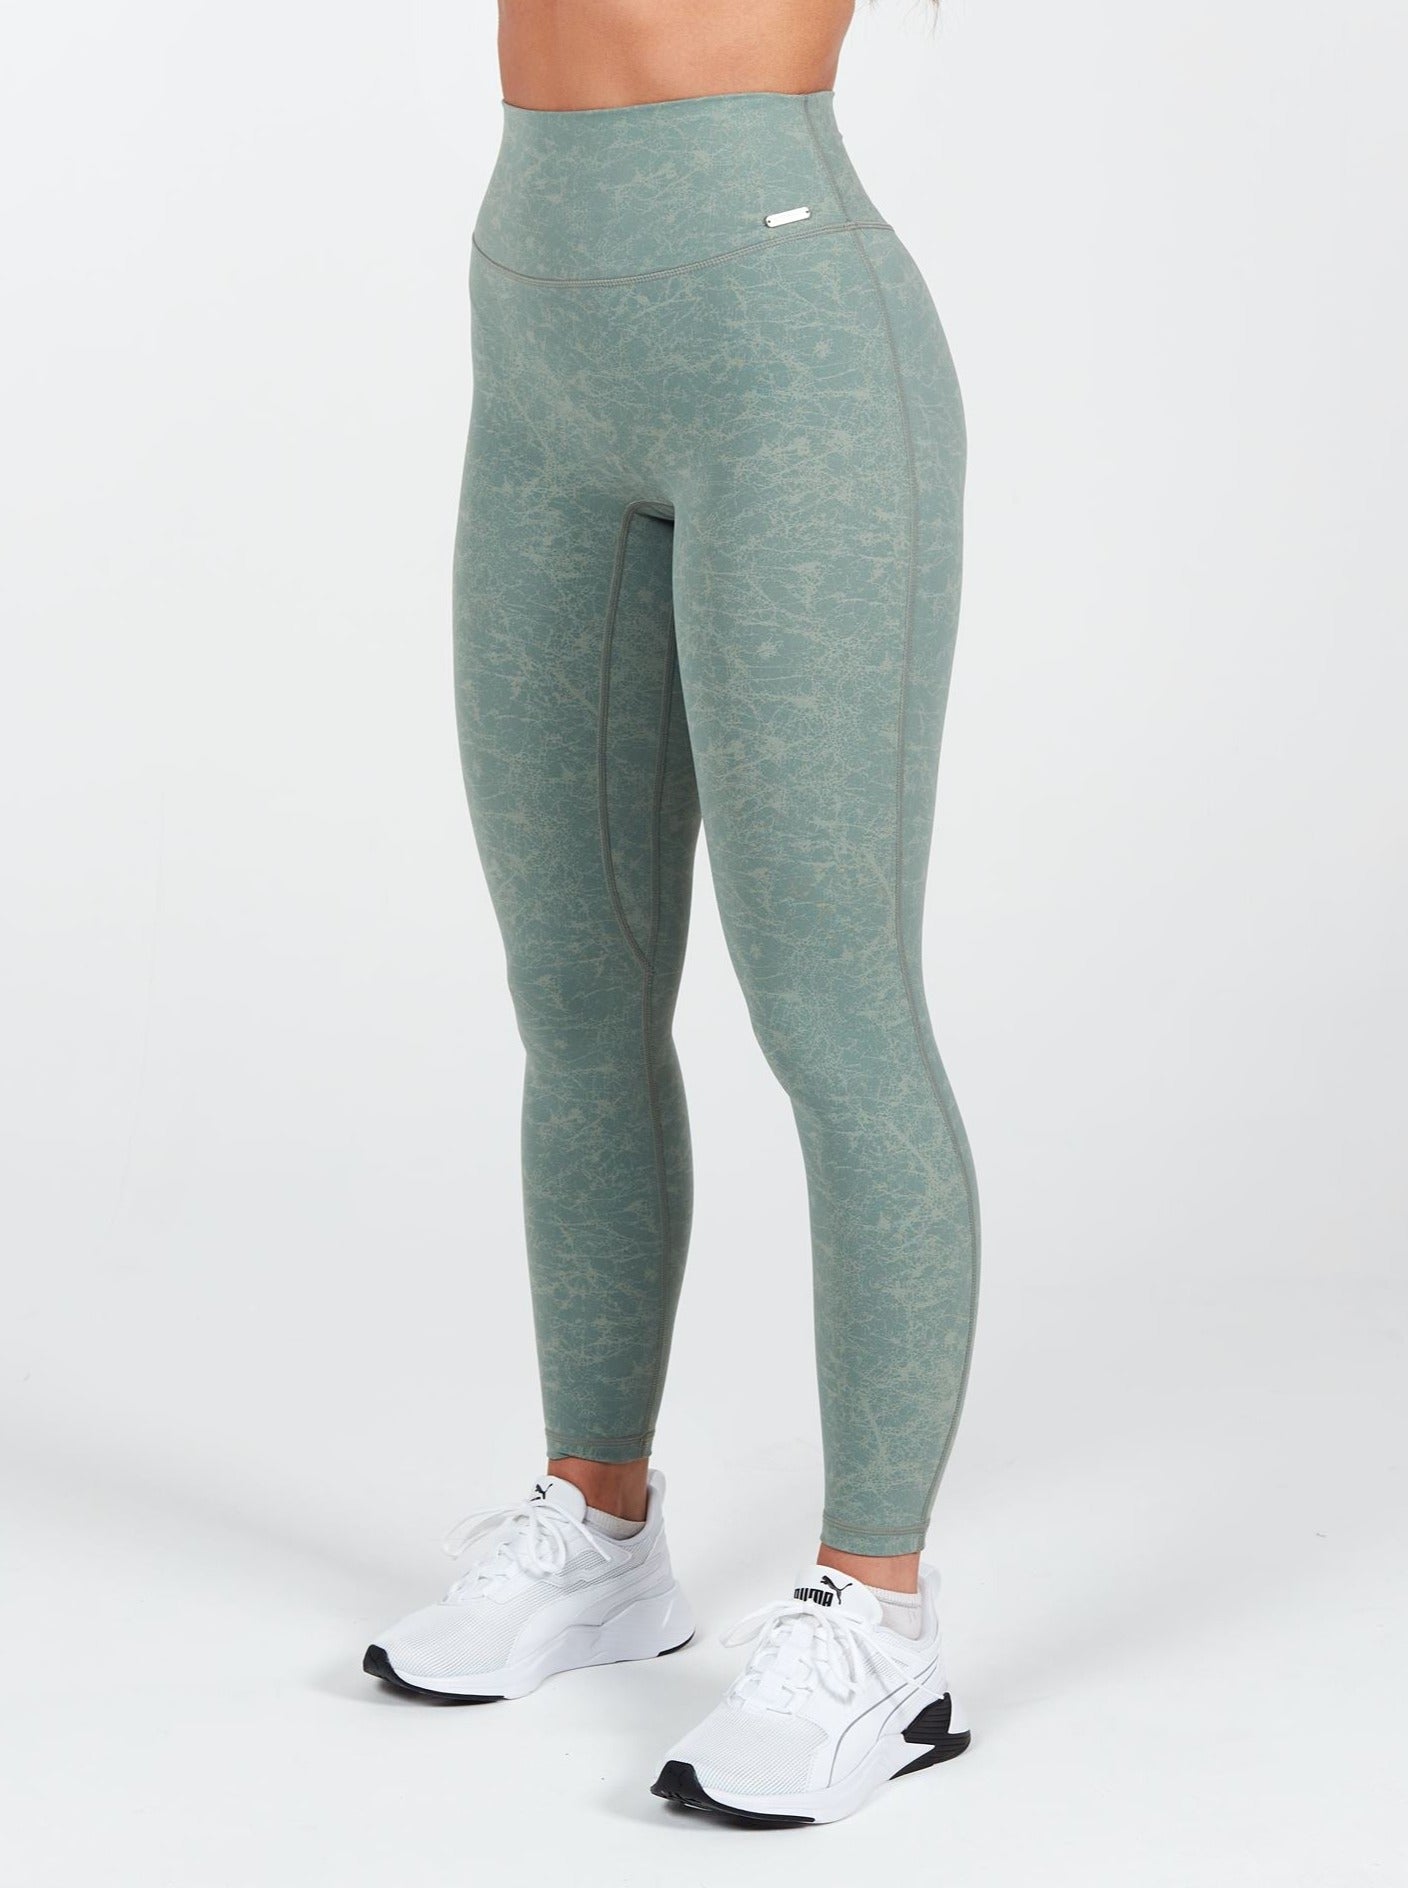 NWT Glyder High Rise Leggings with Pocket Green Moss Size Medium Squat Proof